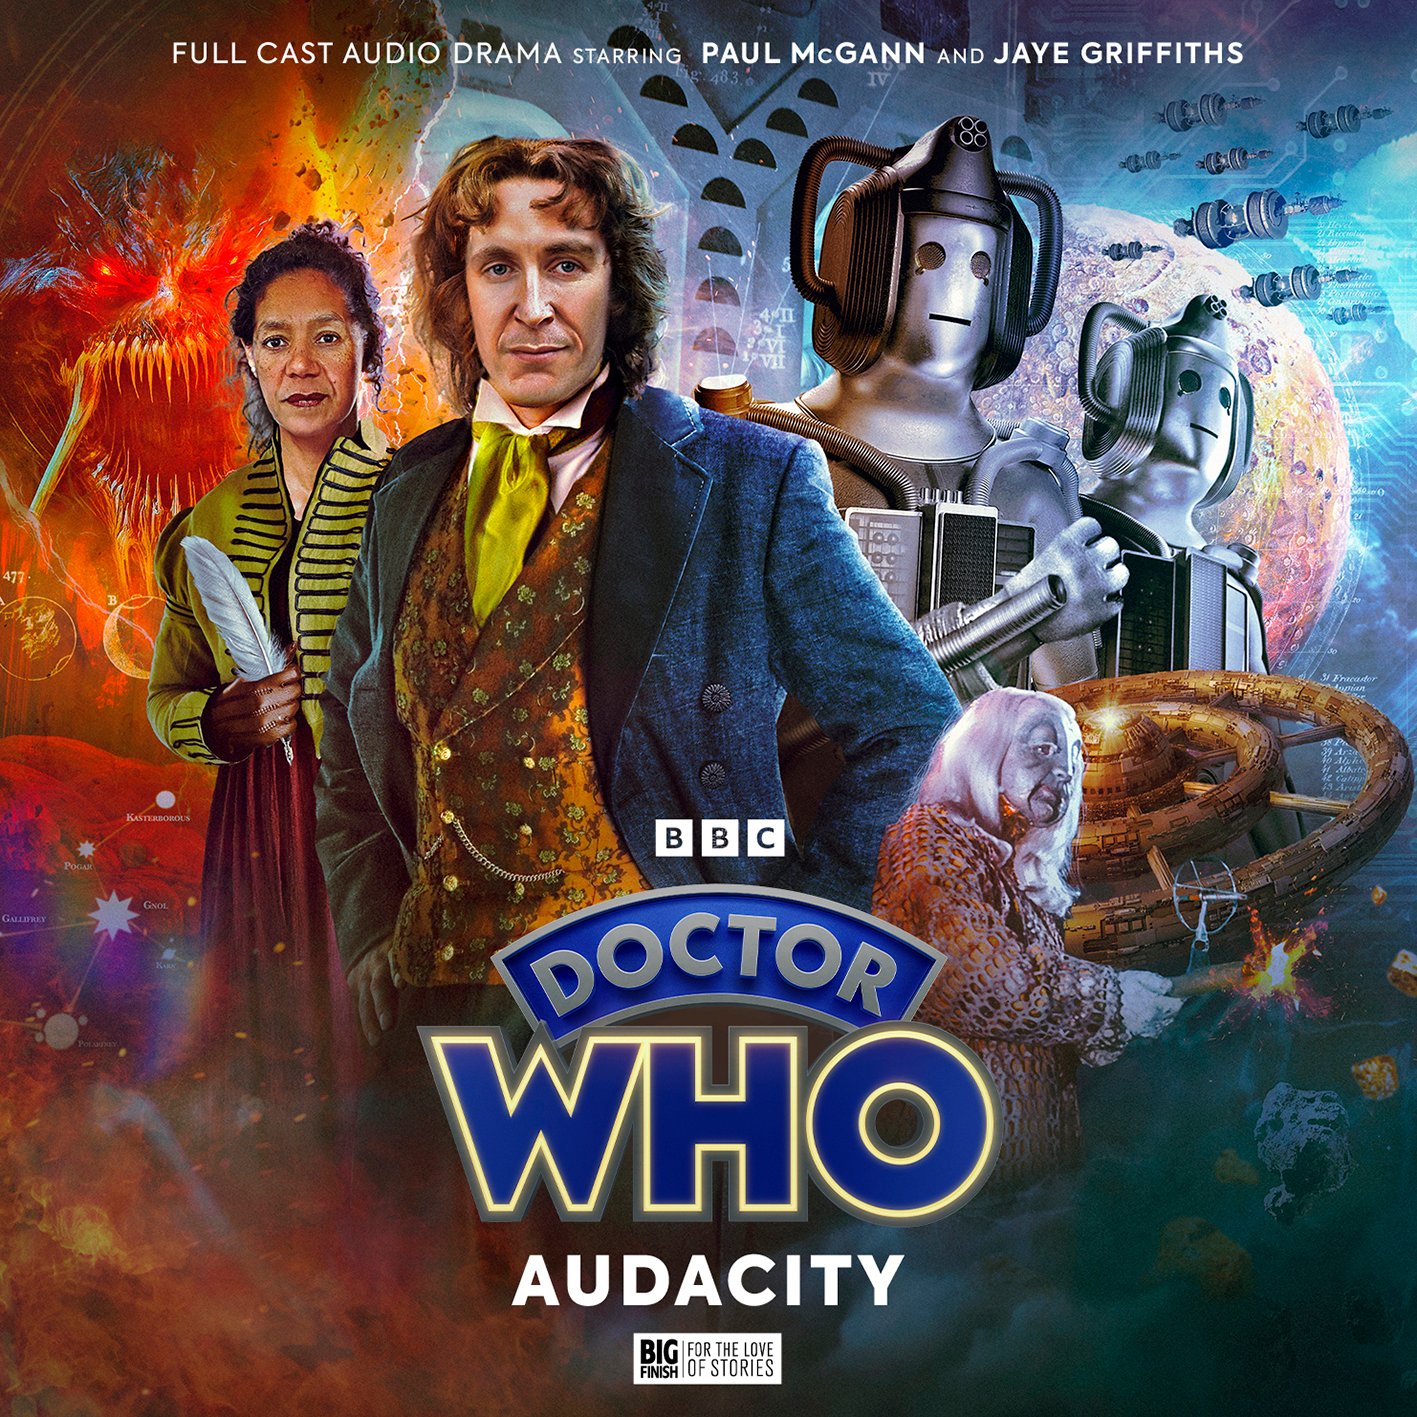 Paul McGann’s Eighth Doctor to Return in New Sets, Audacity and In the Bleak Midwinter